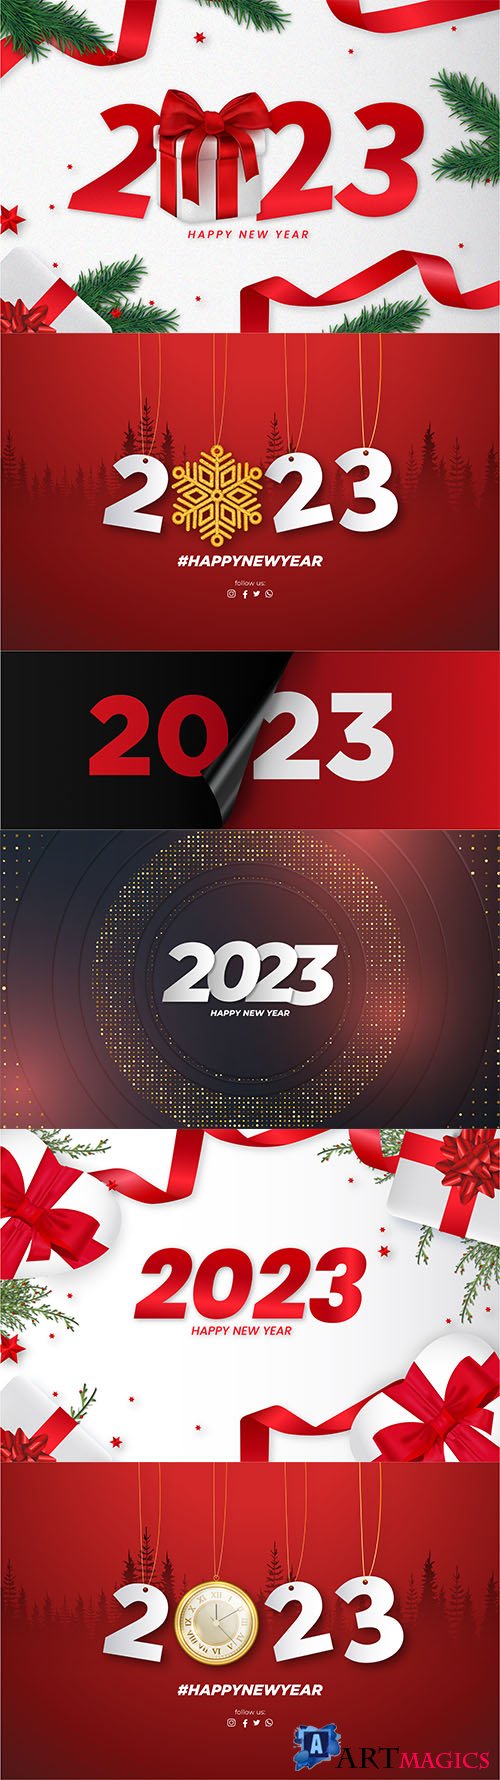 2023 new year on red vector background